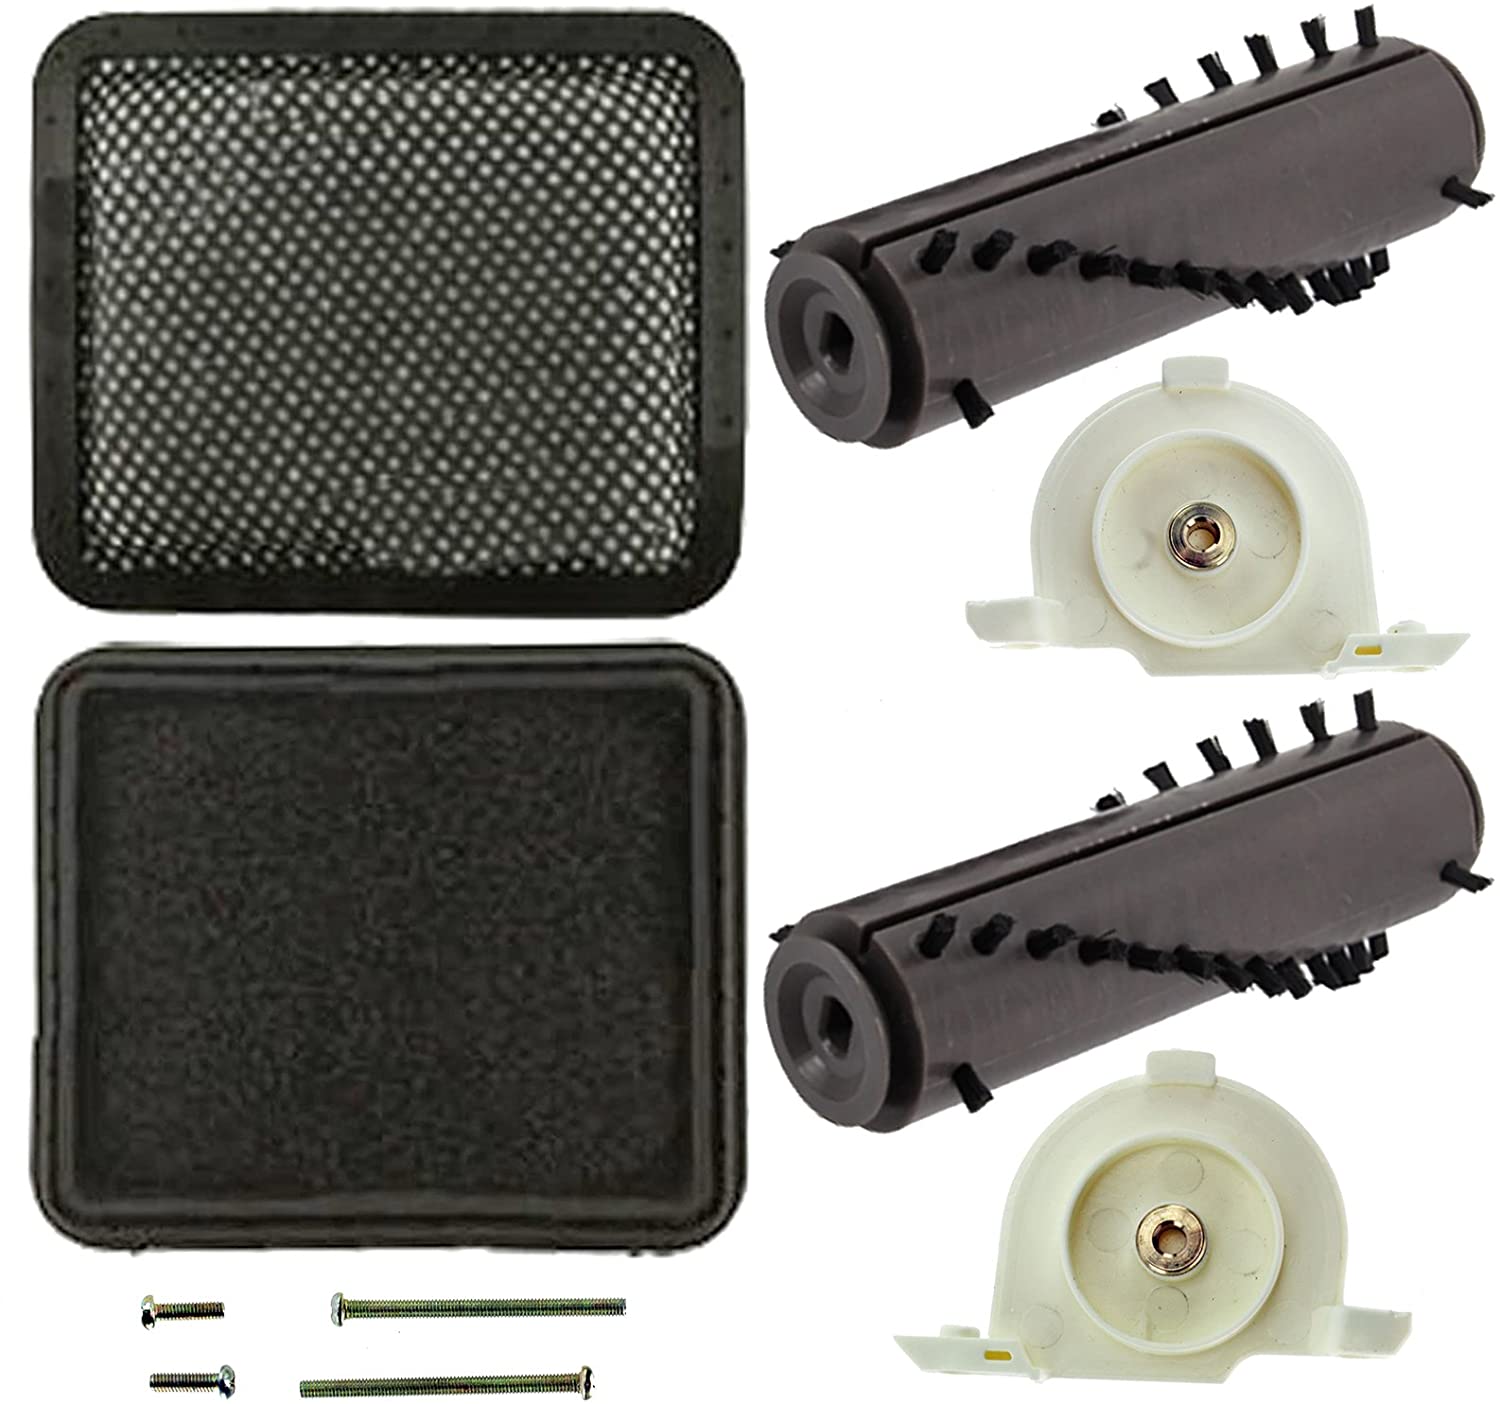 Complete Brushroll End Caps + Washable Filter Pads Kit for GTech AirRam Cordless Vacuum Cleaner